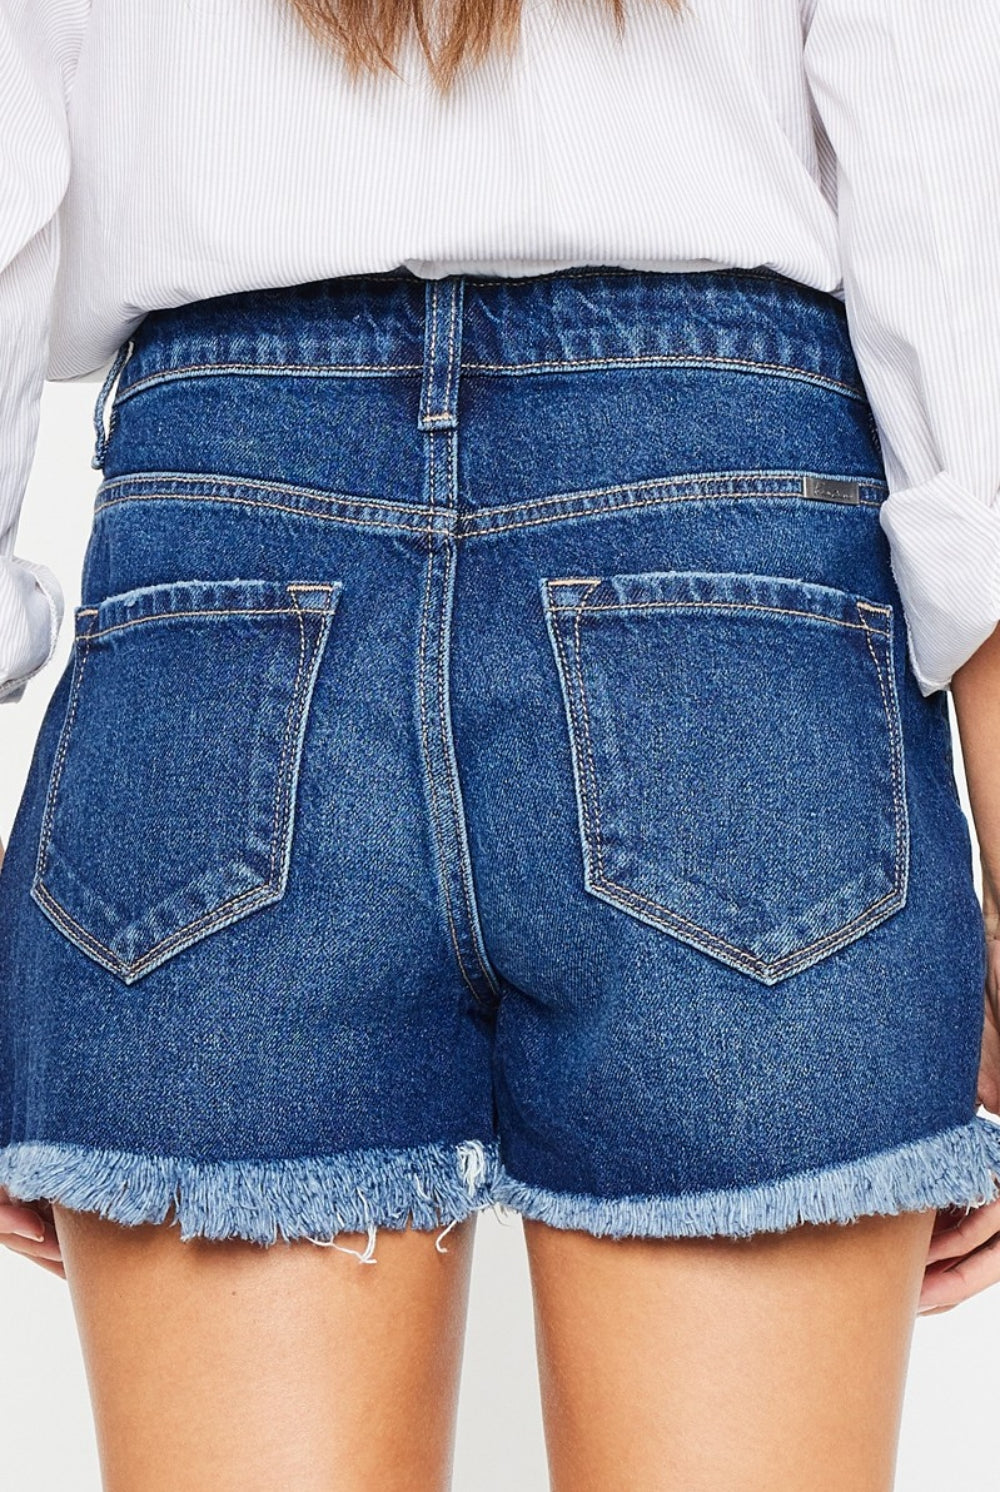 Woman wearing chic blue distressed denim shorts, perfect for a casual summer day.